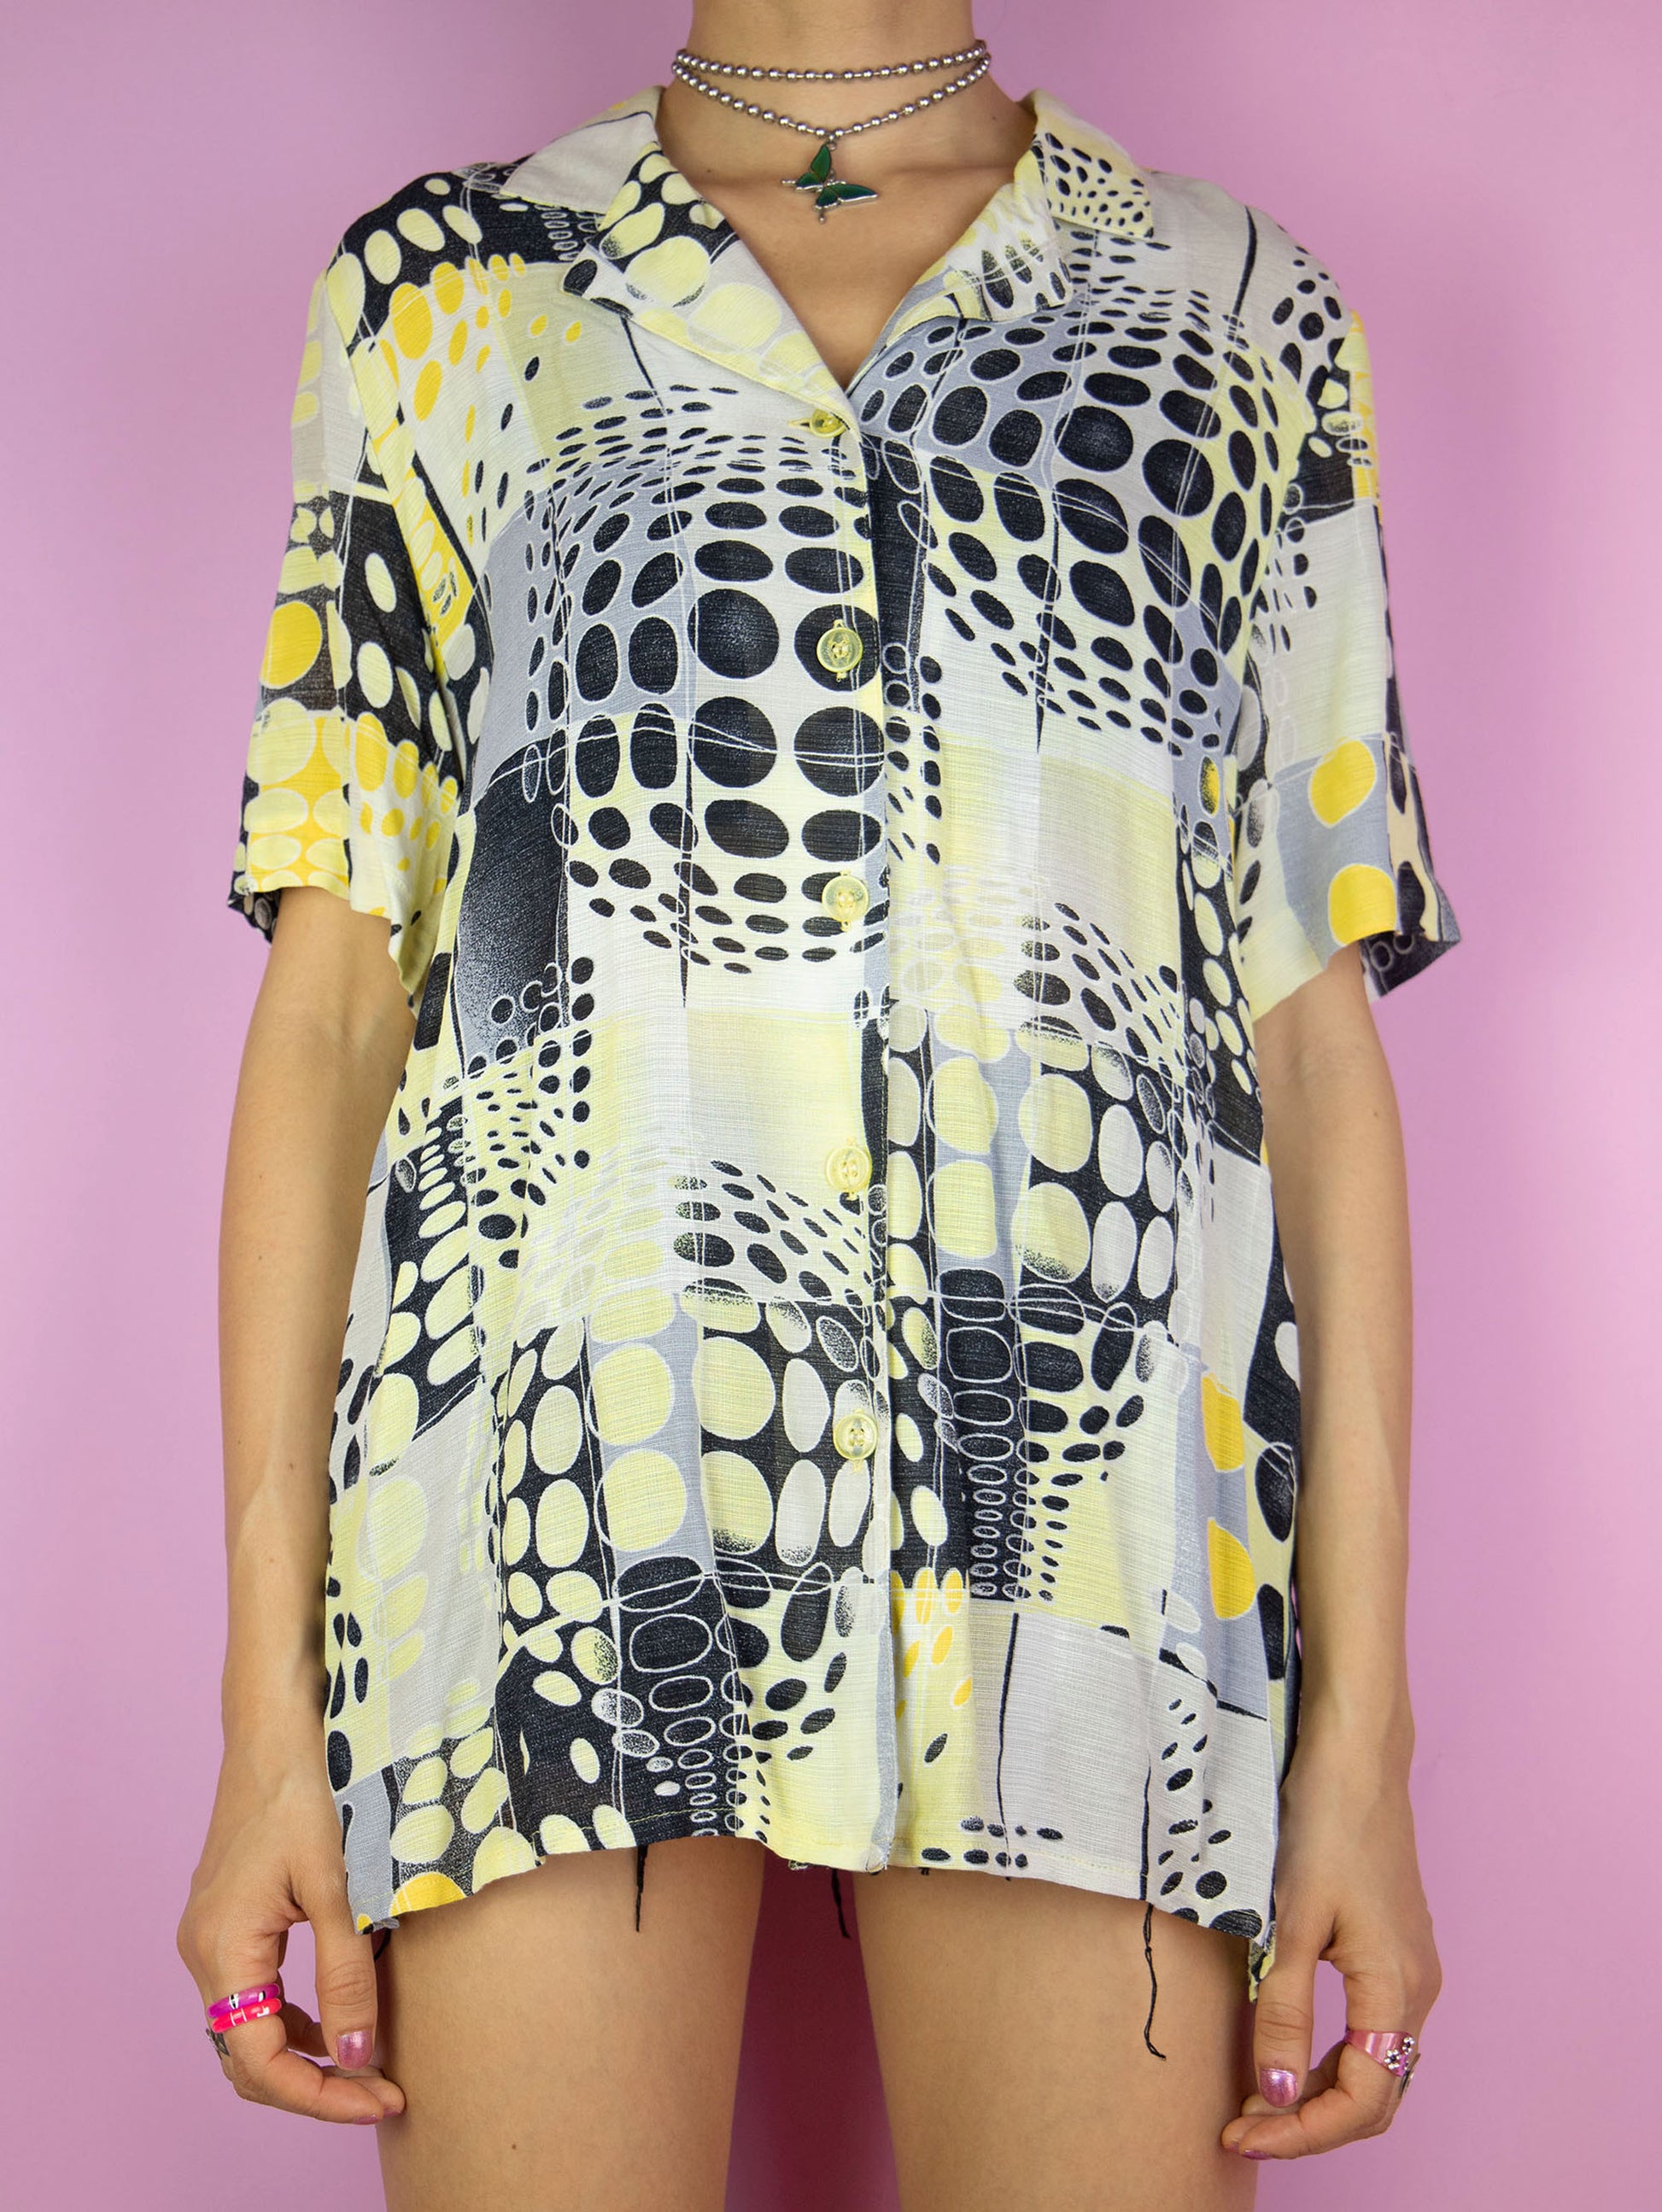 The Vintage 90s Retro Abstract Shirt is a yellow black and white short sleeve crazy geometric pattern collared blouse with button closure. Gorgeous summer festival 1990s top.